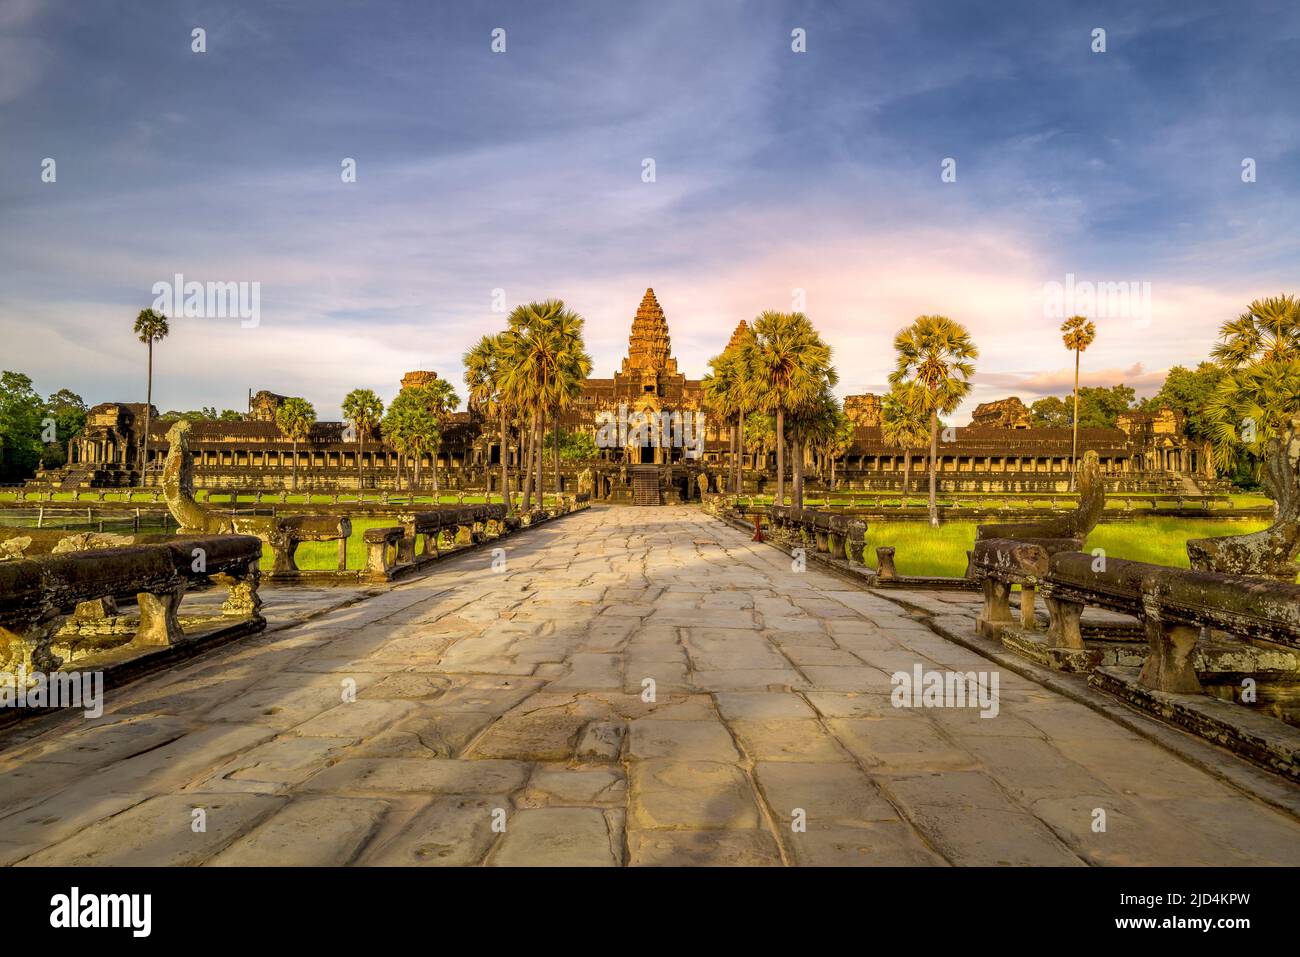 Angor Wat temple in Siem Reap Cambodia Stock Photo